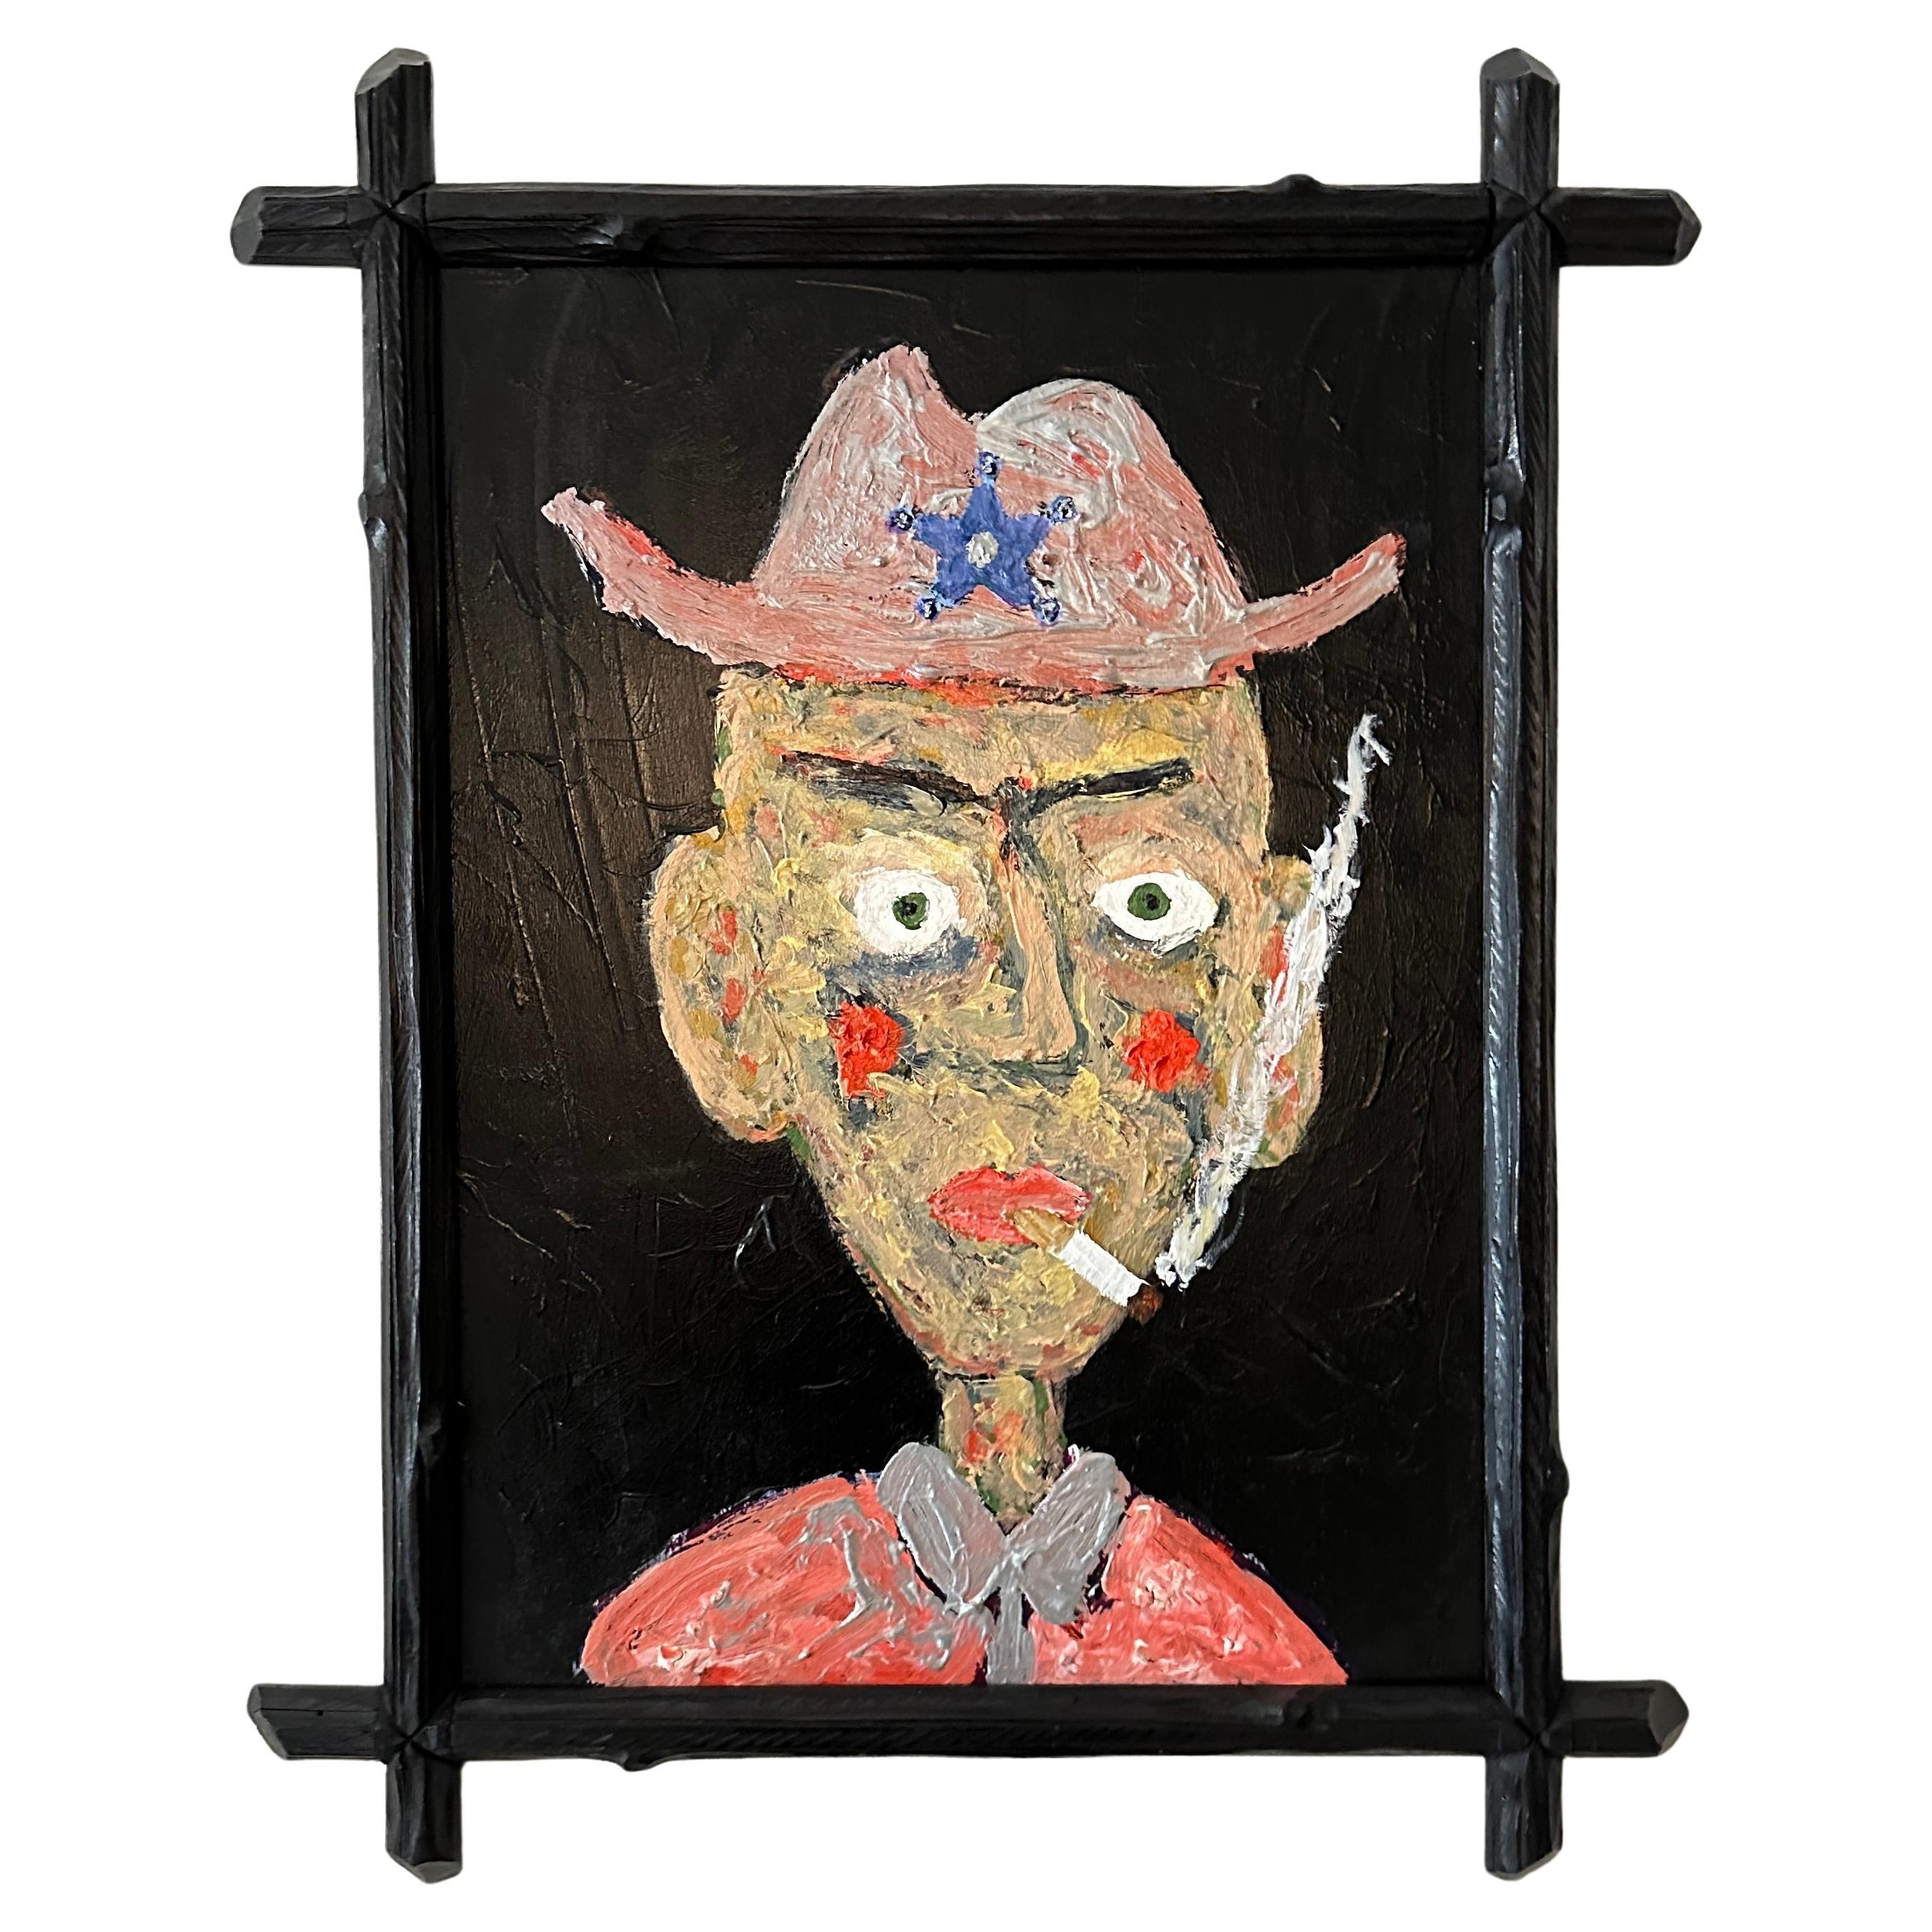 Contemporary Portrait Painting of a Cowboy in Multicolored Acryl Paint on Wood